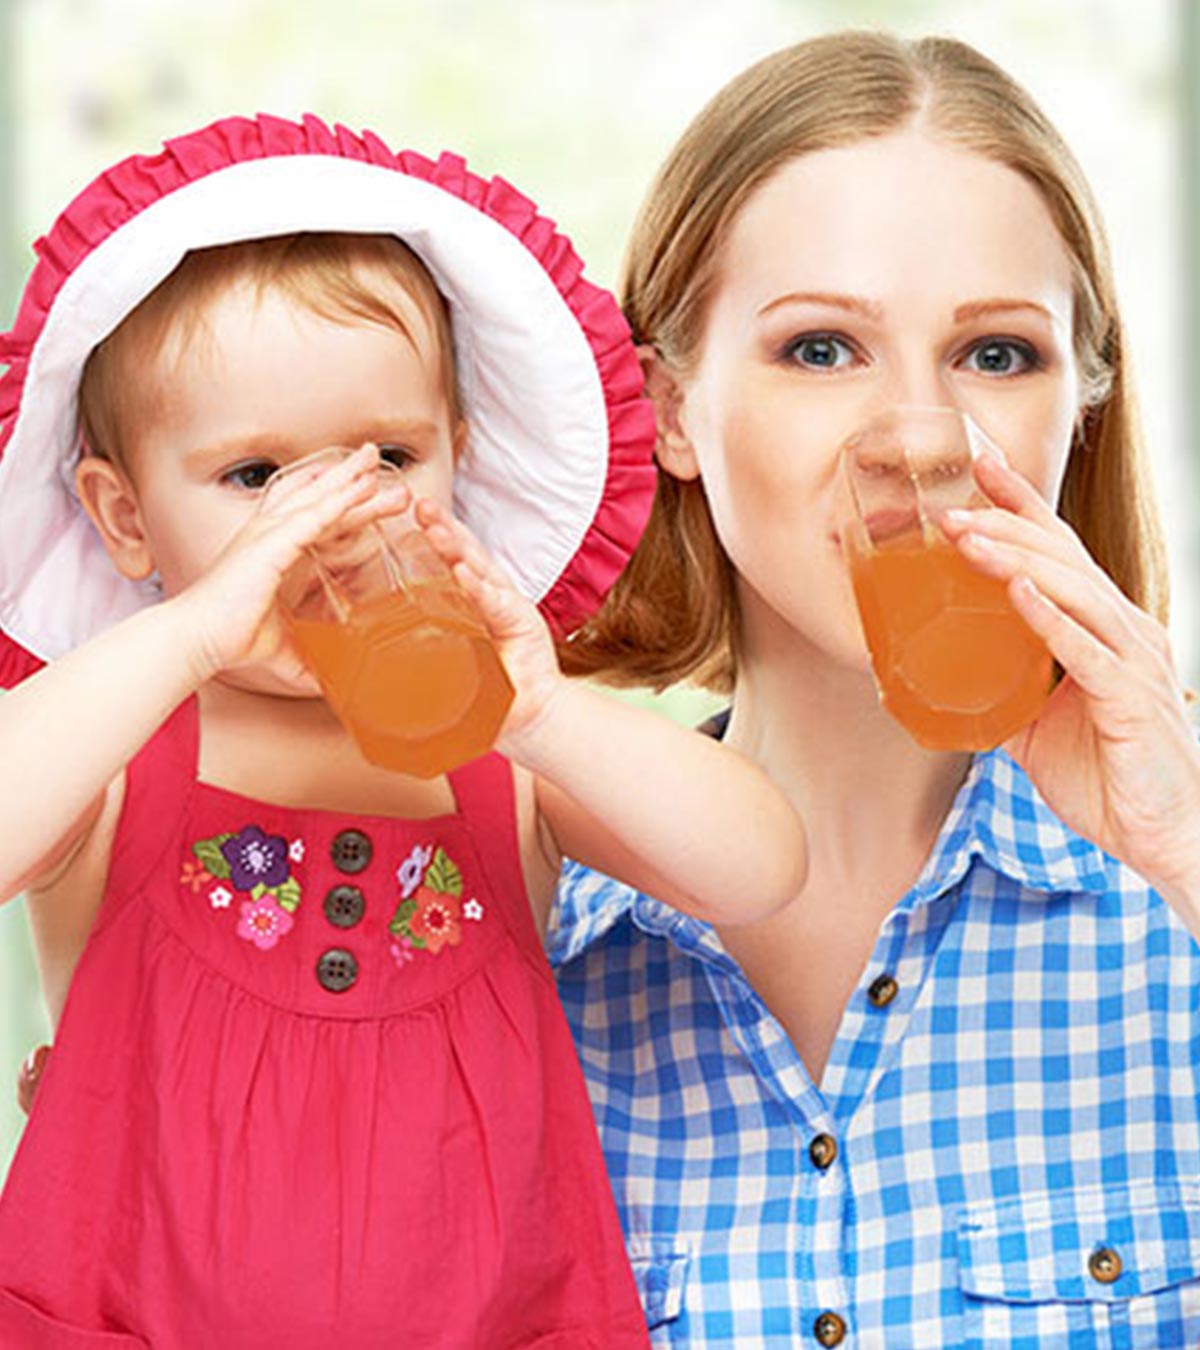 Is It Safe To Drink Apple Juice While Breastfeeding?